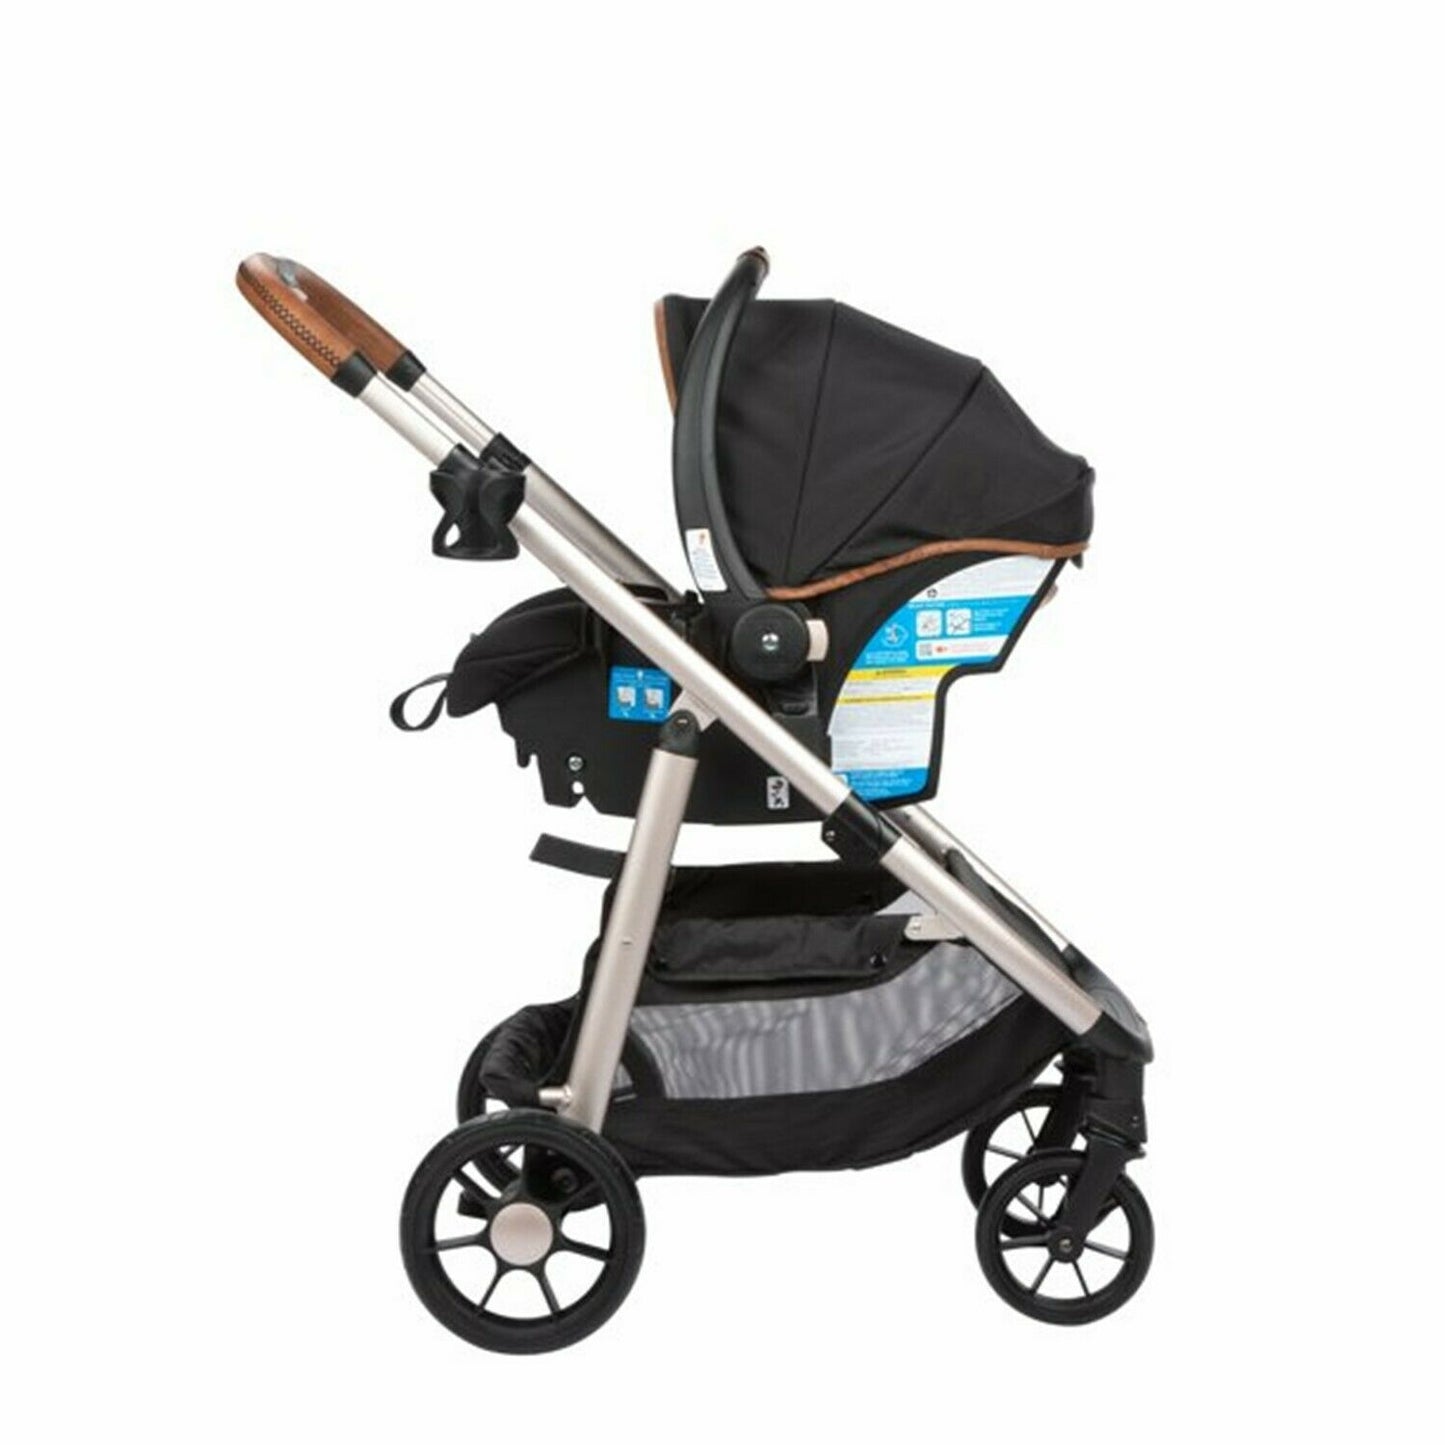 6 in 1 Baby Stroller with Car Seat Infant Playard Modular Travel System Combo